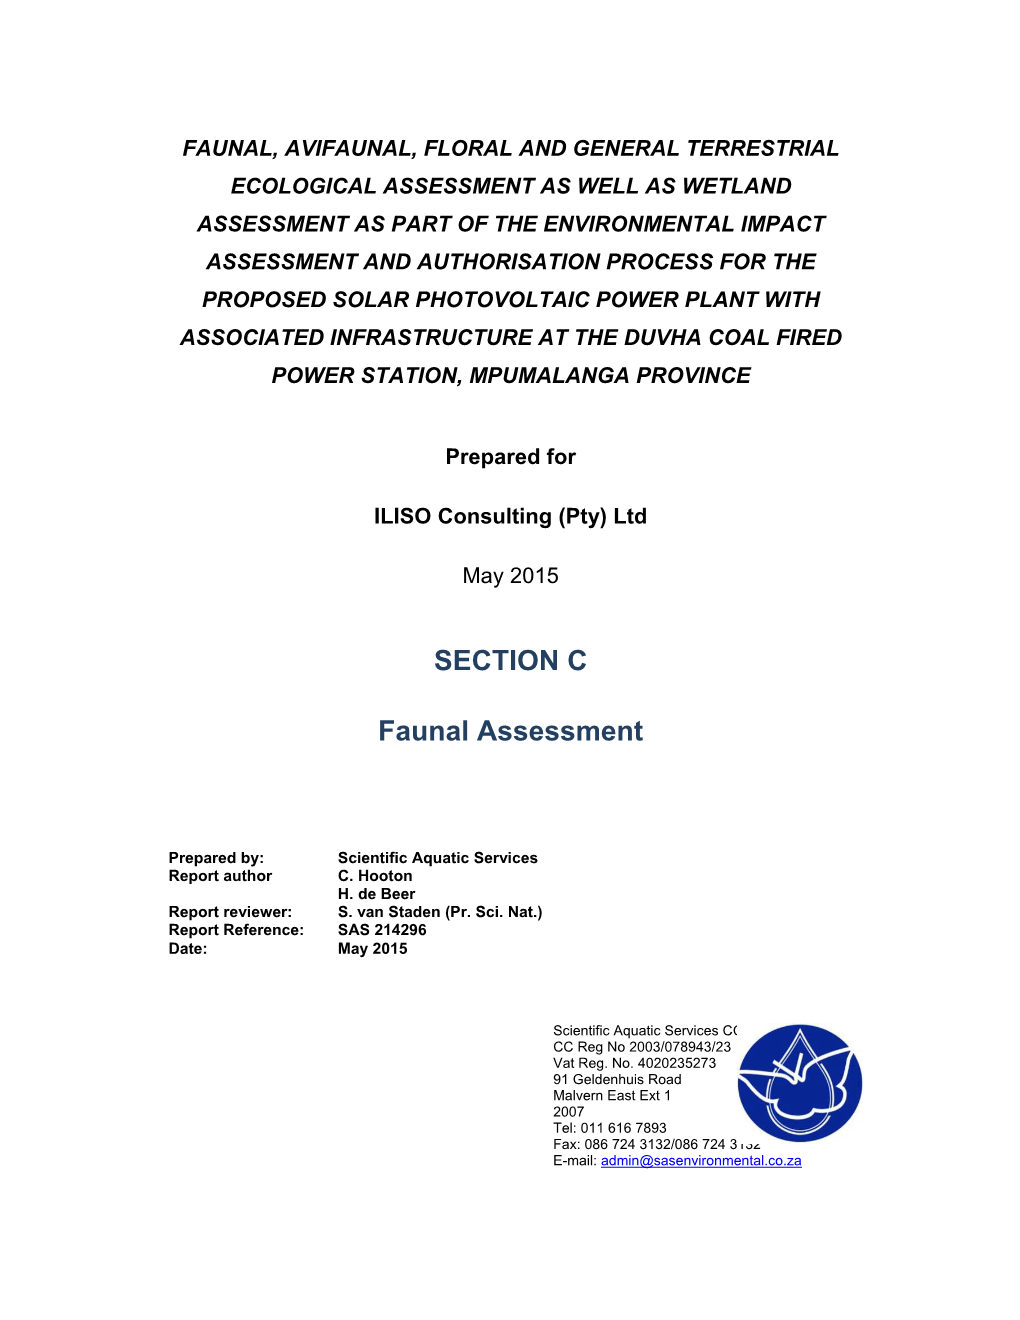 SECTION C Faunal Assessment